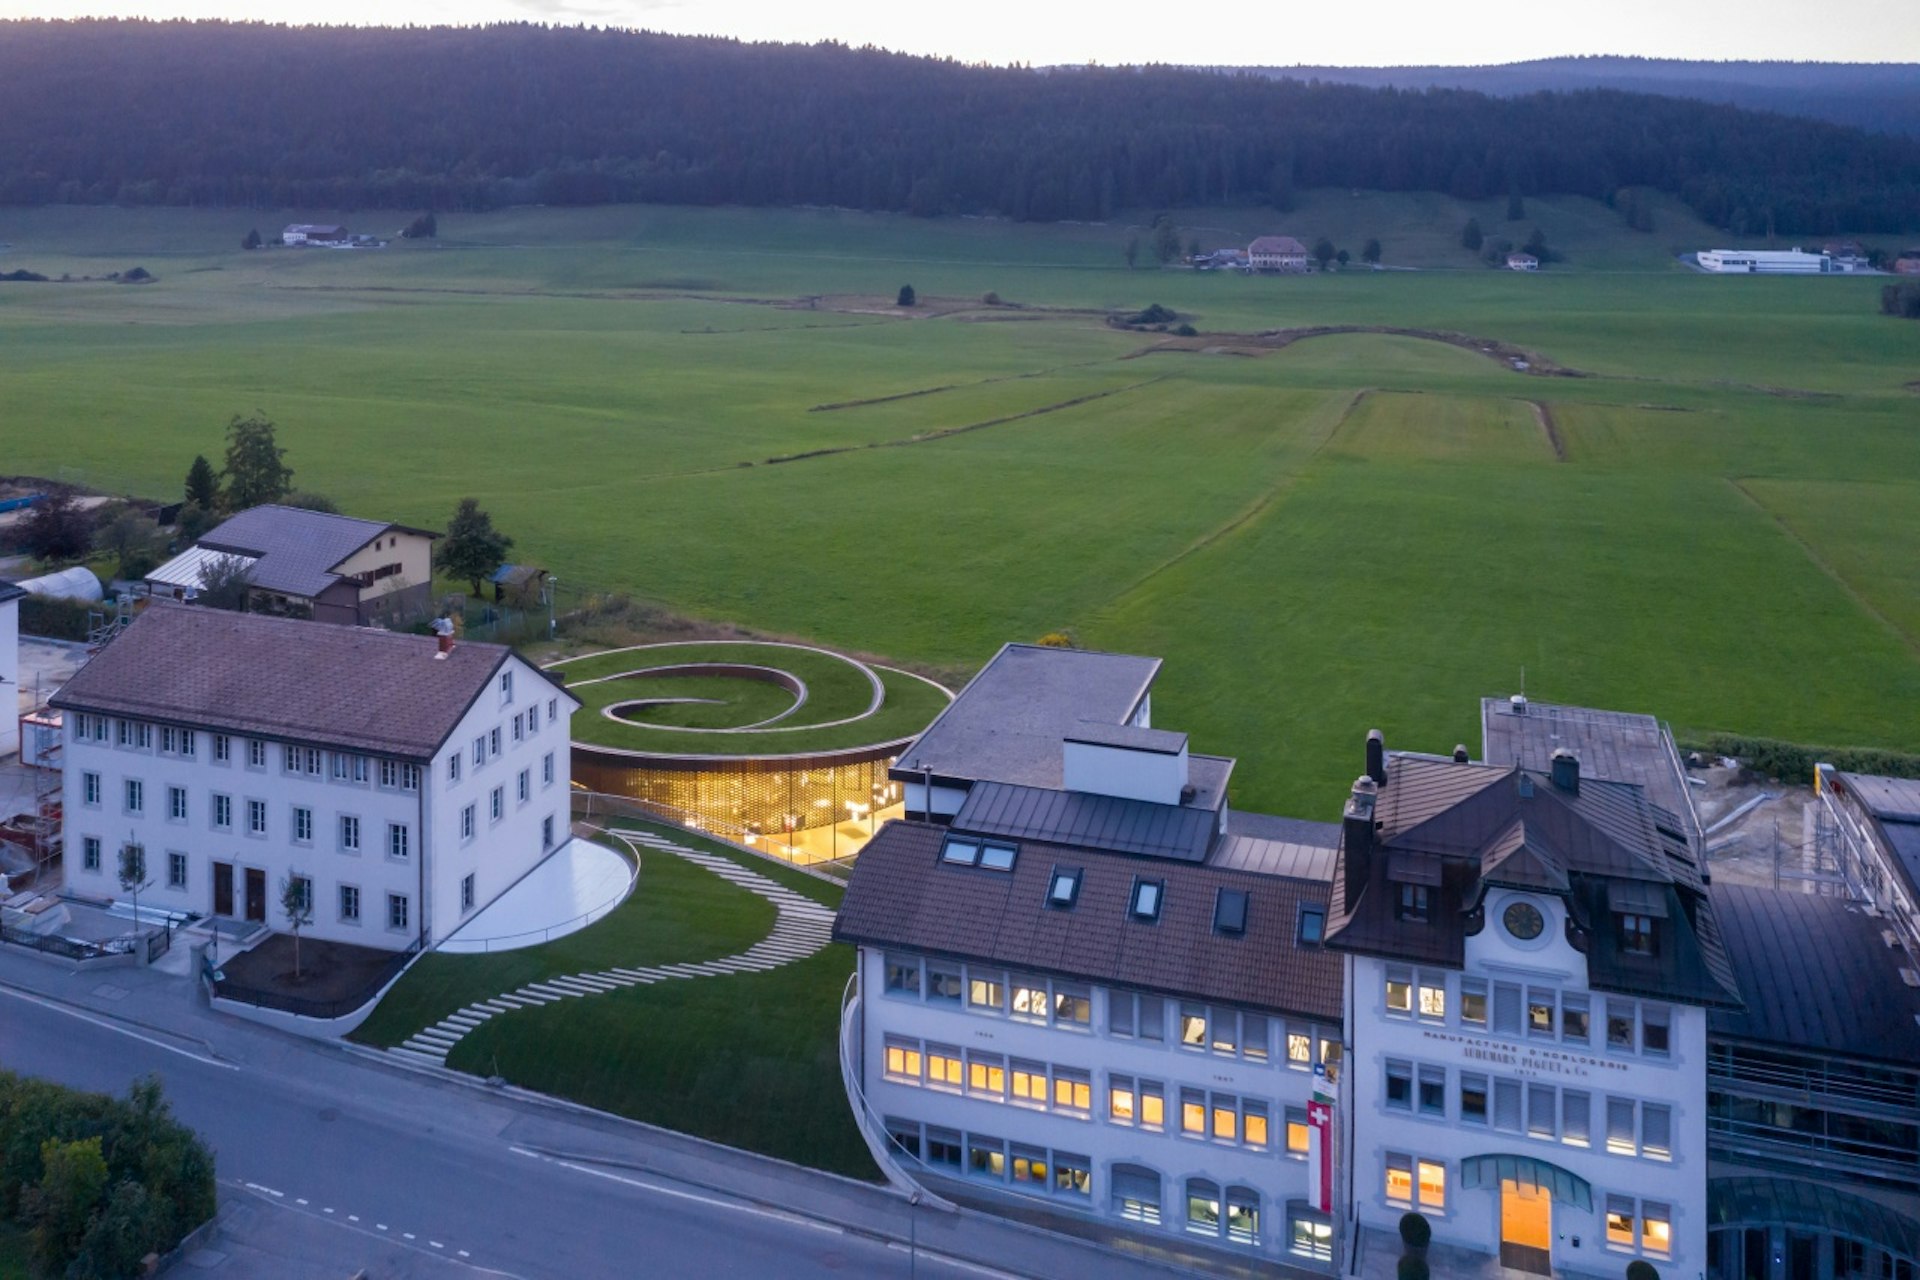 An werial view if the An aerial view of the Musée Atelier Audemars Piguet in Switzerland